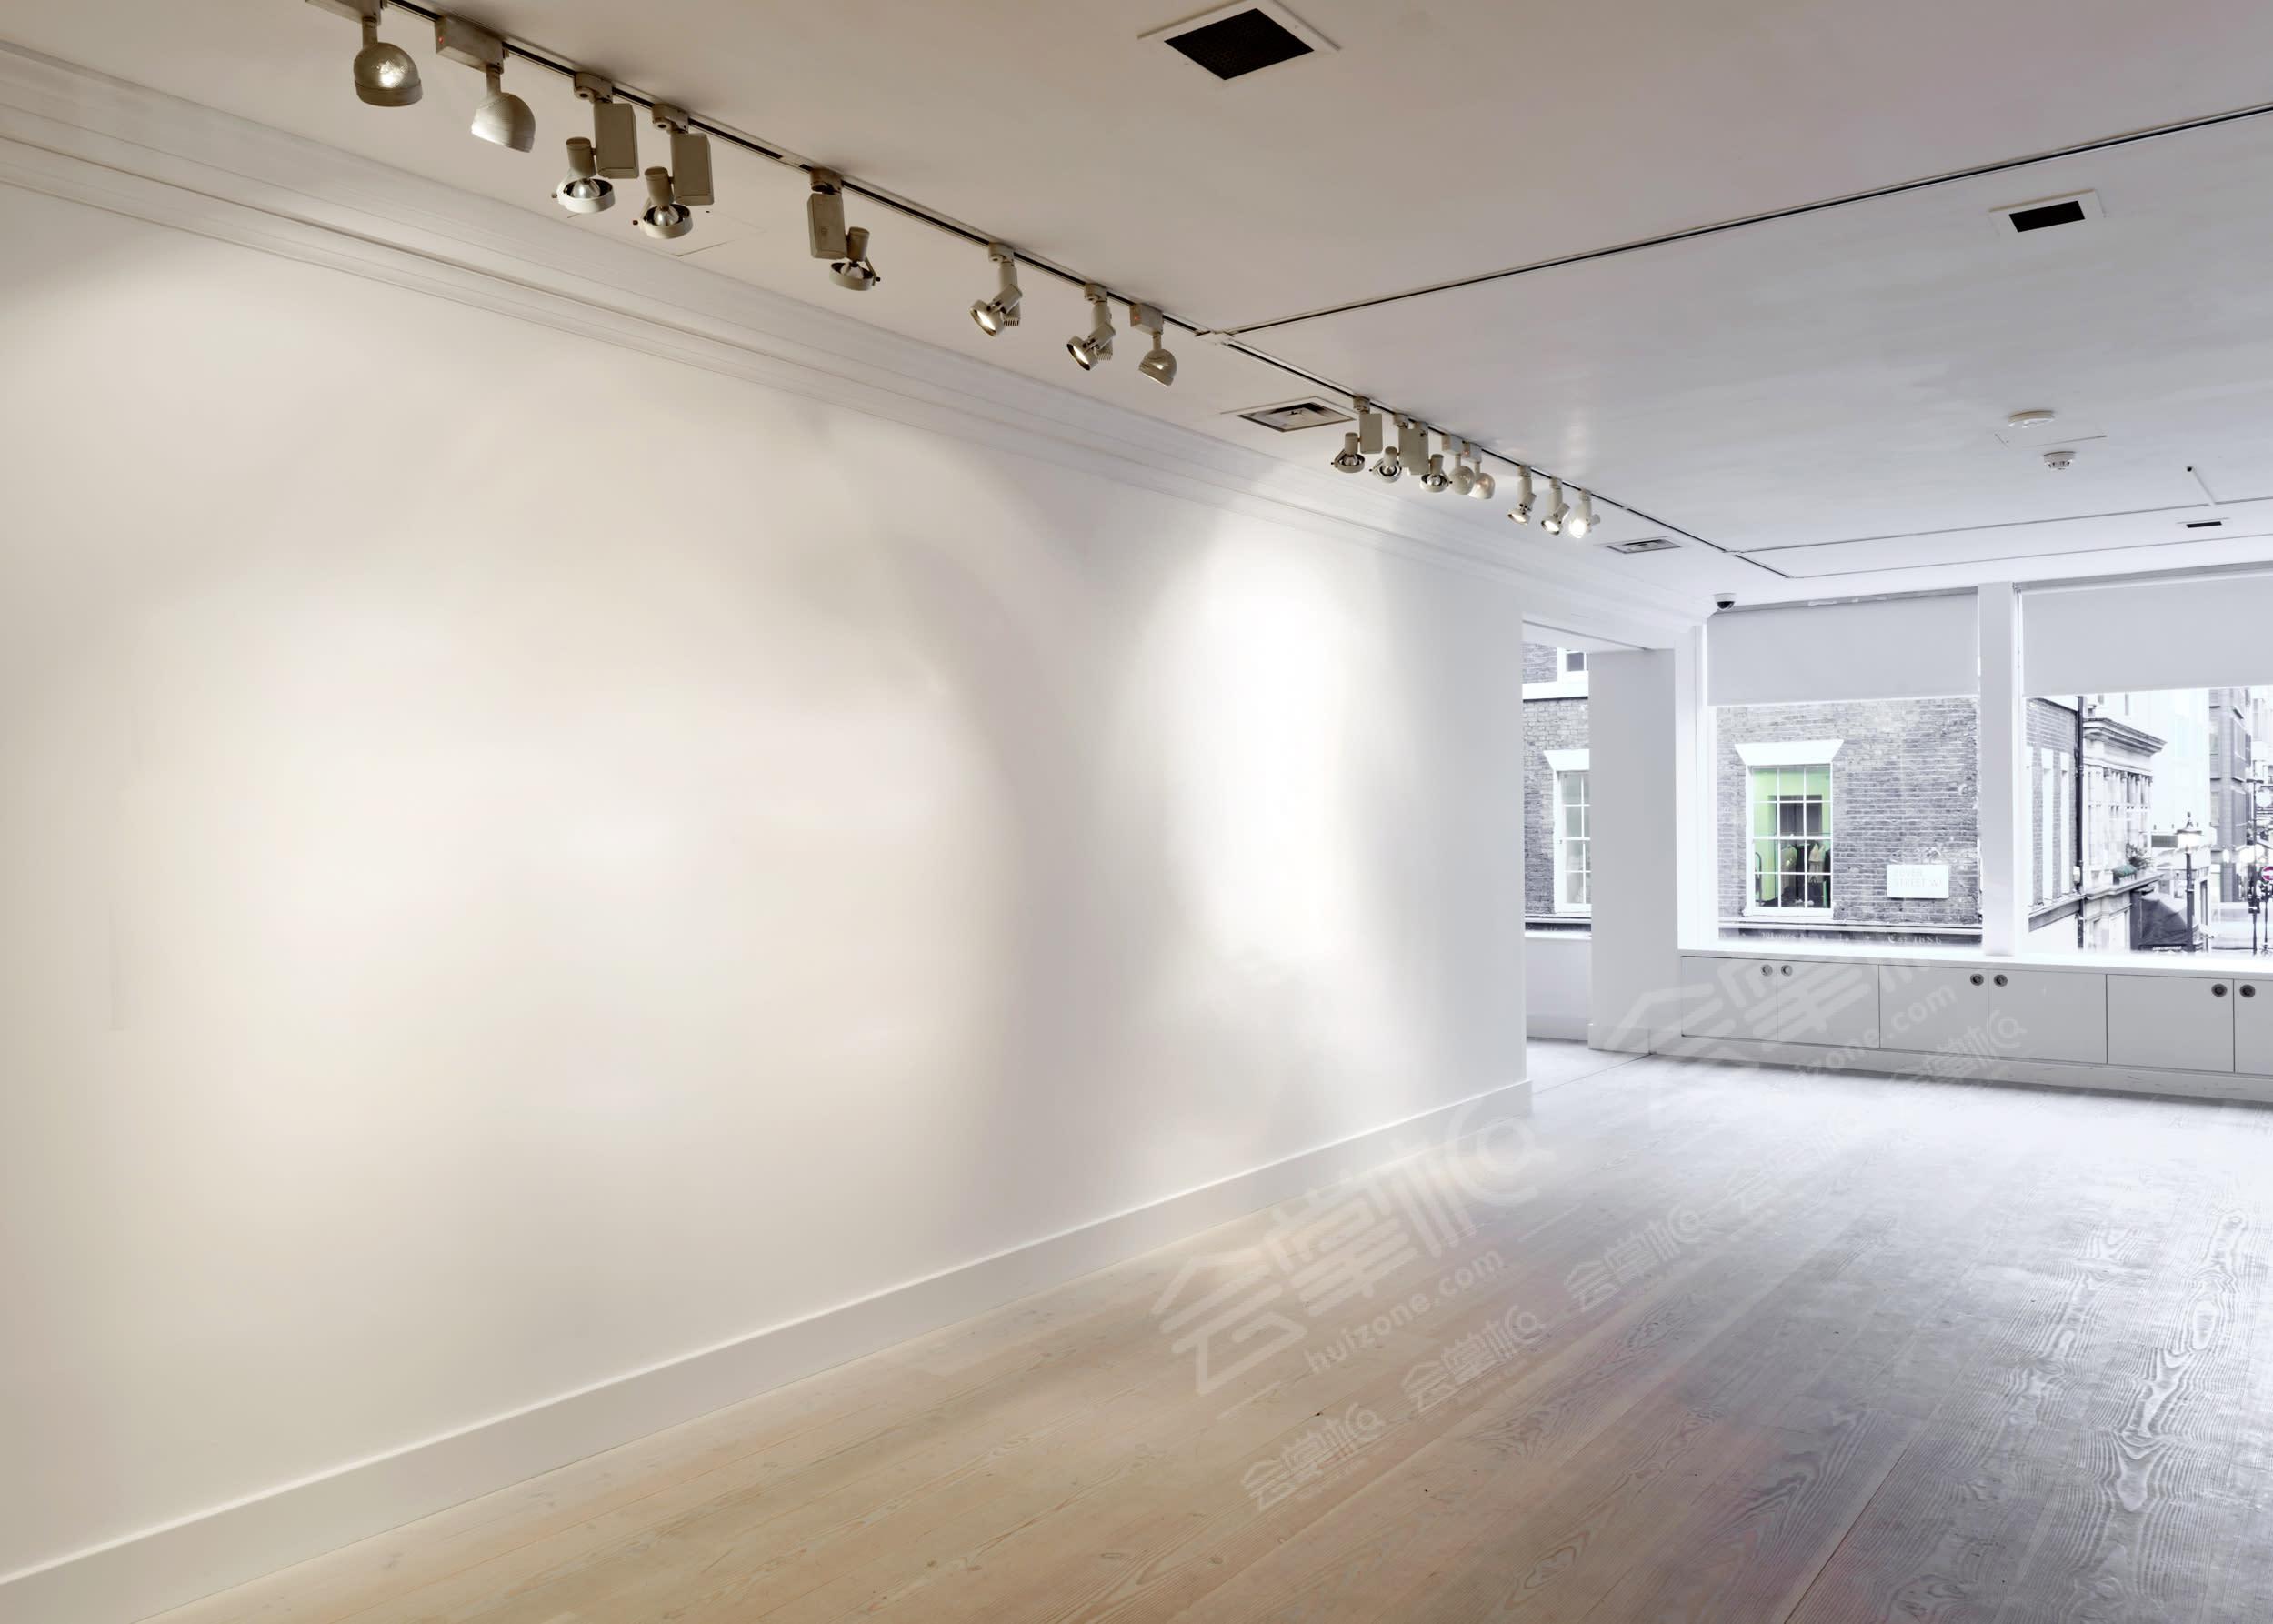 Contemporary Gallery Space in Mayfair 1st Floor Only